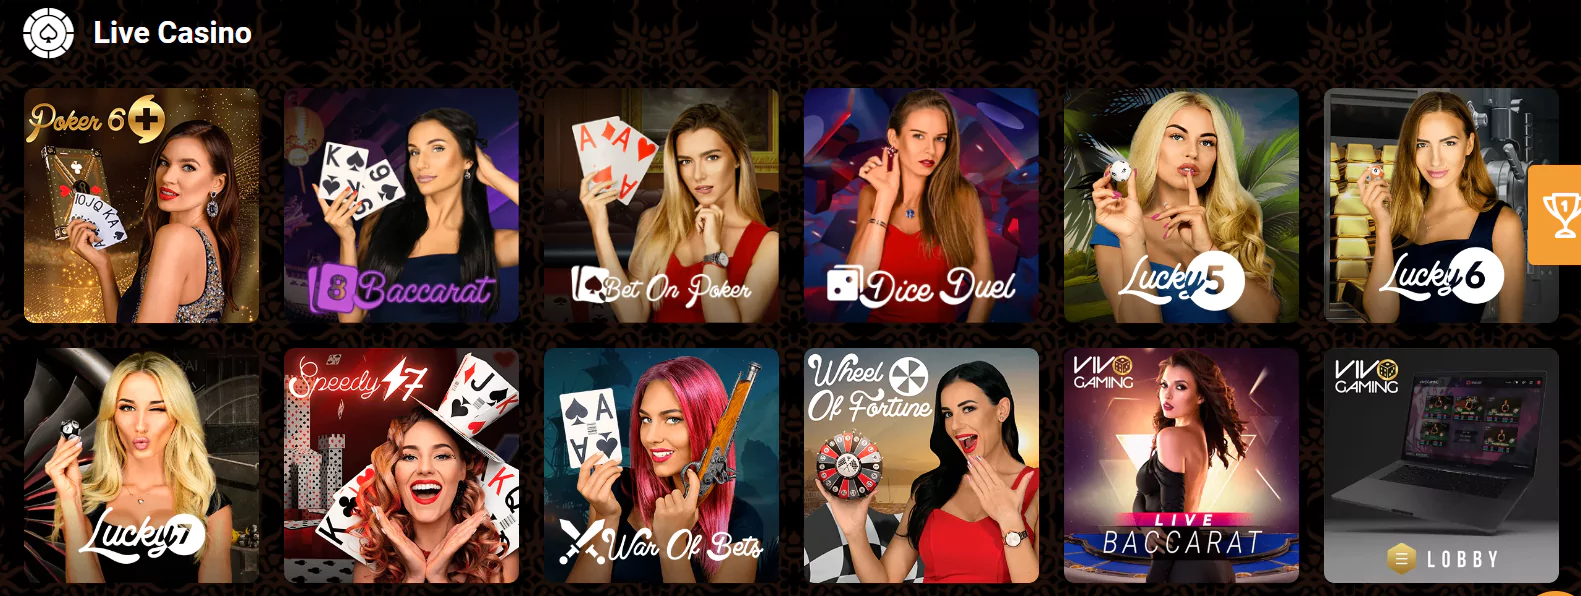 What Make live casino with bonus Don't Want You To Know